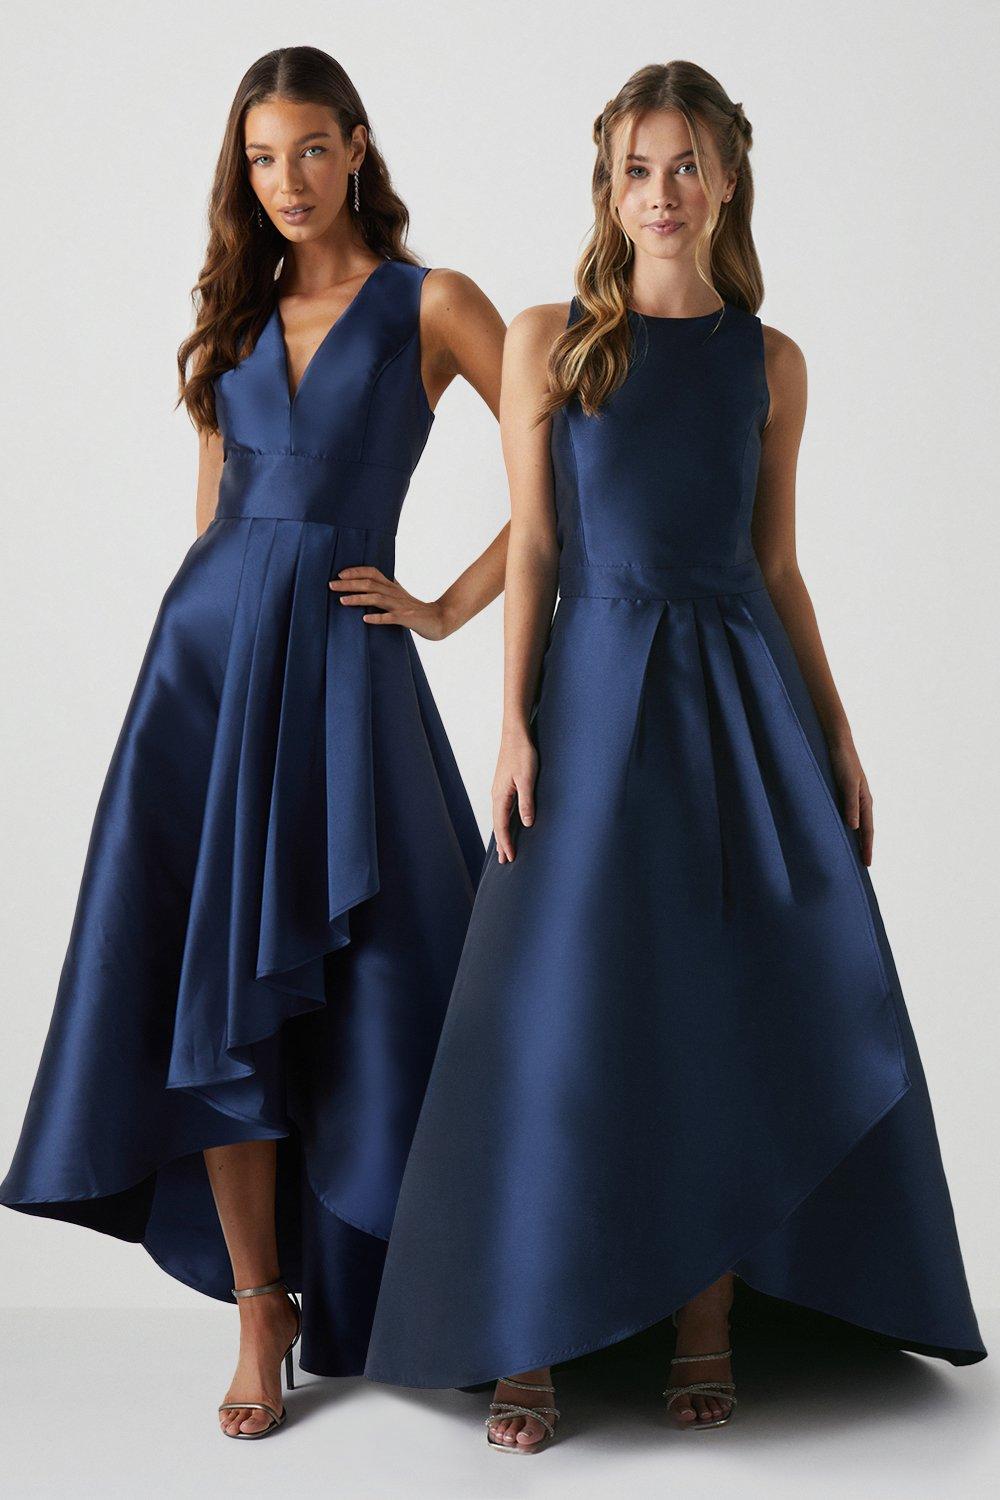 Waterfall Dress Navy - Wedding Dresses, Evening Wear and Party Clothes by  Alie Street.